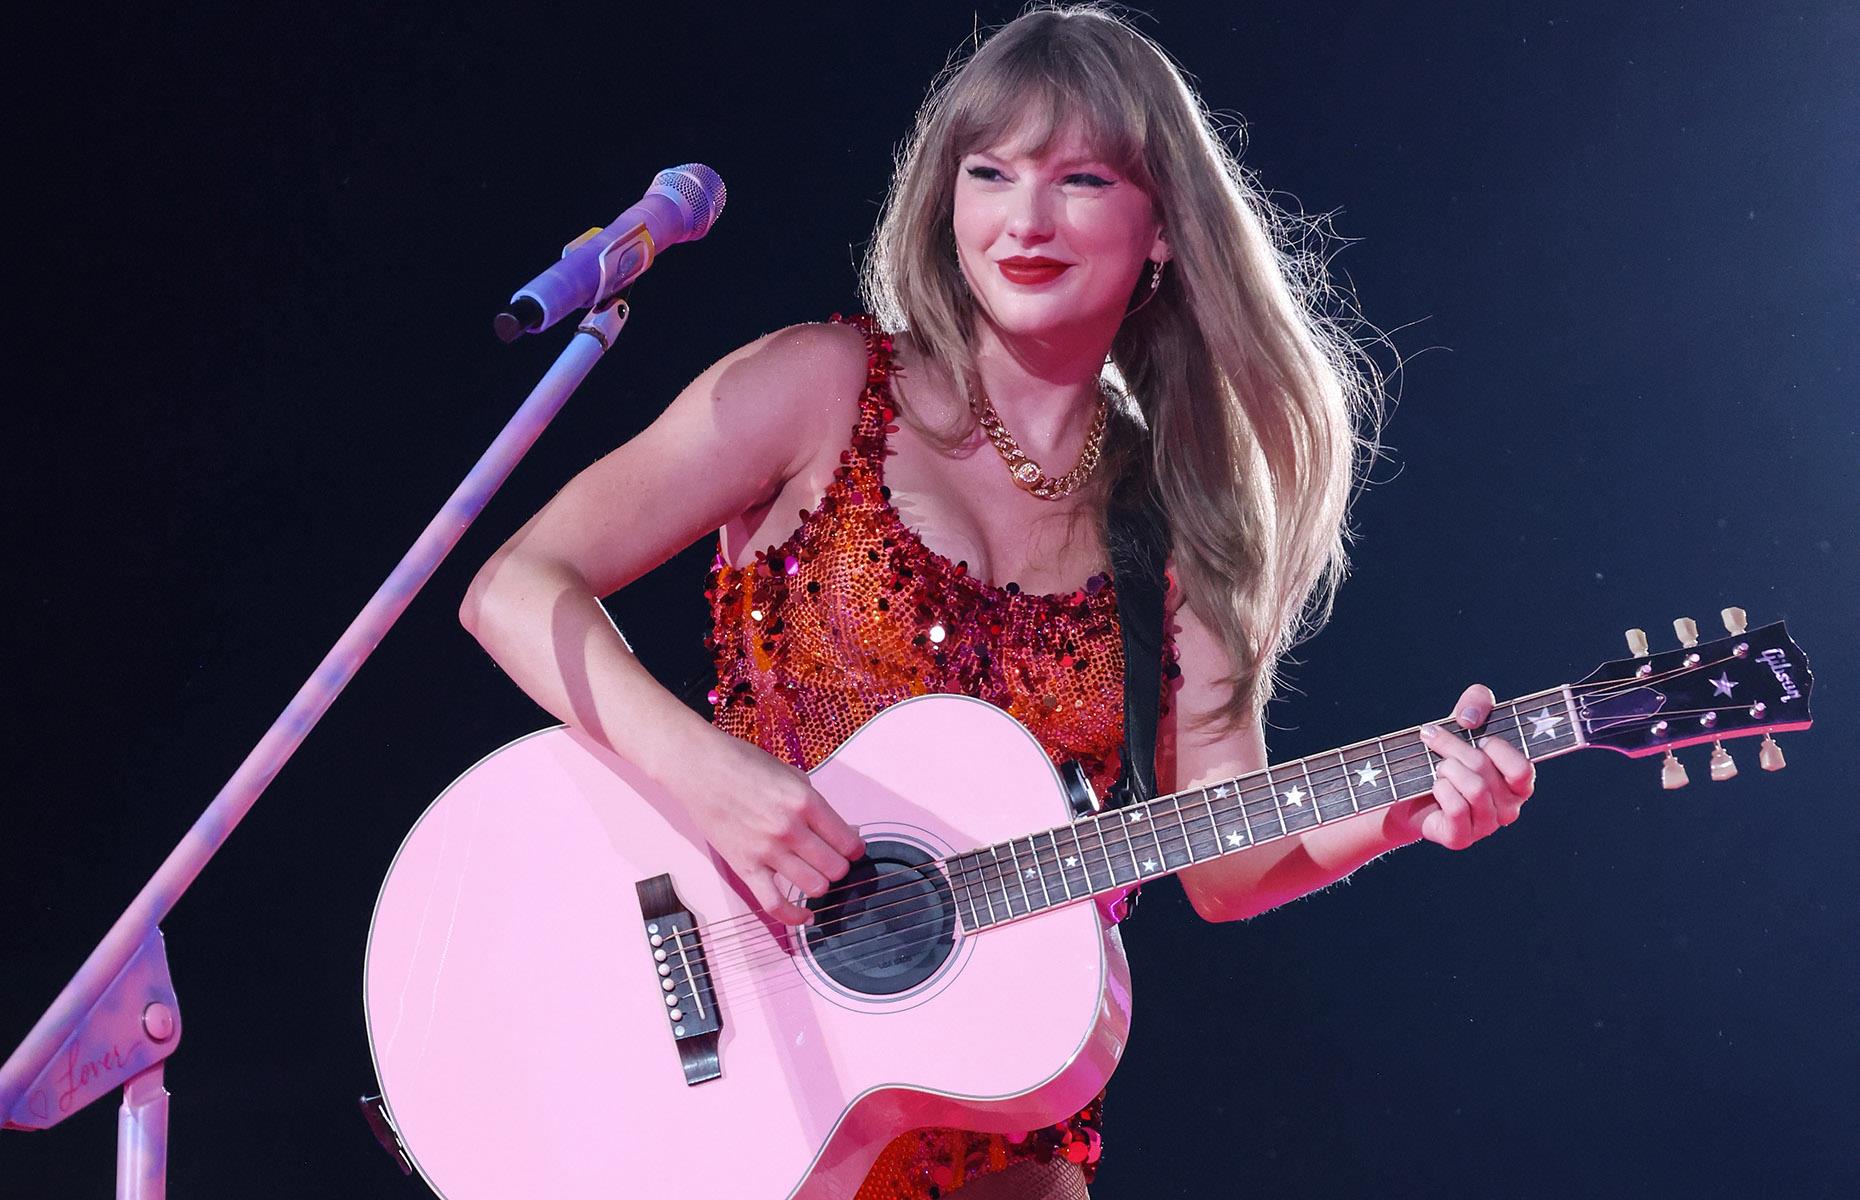 <p>Claiming the top spot on our round-up is Taylor Swift's <em>The Eras Tour</em>, which kicked off in March 2023 and is set to wrap up its record-shattering run this December. By the end of the landmark tour, the pop megastar will<em> Shake It Off </em>during 152 performances across five continents.</p>  <p>These epic three-hour extravaganzas see Swift belt out her biggest hits from all 11 studio albums, taking her fans on a journey through each era of her illustrious career. In December 2023, <em>The Eras Tour</em> crossed an unprecedented $1 billion threshold, claiming the title of the highest-grossing concert tour of all time and becoming the first tour to ever surpass the billion-dollar mark.</p>  <p>By the time the final curtain falls, <em>Variety</em> projects it will have grossed an eye-watering $1.4 billion in ticket sales alone, further confirming Swift's status as a global entertainment icon to be reckoned with.</p>  <p><strong>Now discover some of the <a href="https://www.lovemoney.com/gallerylist/215951/taylor-swifts-midas-touch-and-the-incredible-numbers-behind-the-eras-tour">incredible numbers behind<em> The Eras Tour</em></a></strong></p>  <p><span><strong>Liked this? Click on the Follow button above for more great stories from loveMONEY</strong></span></p>